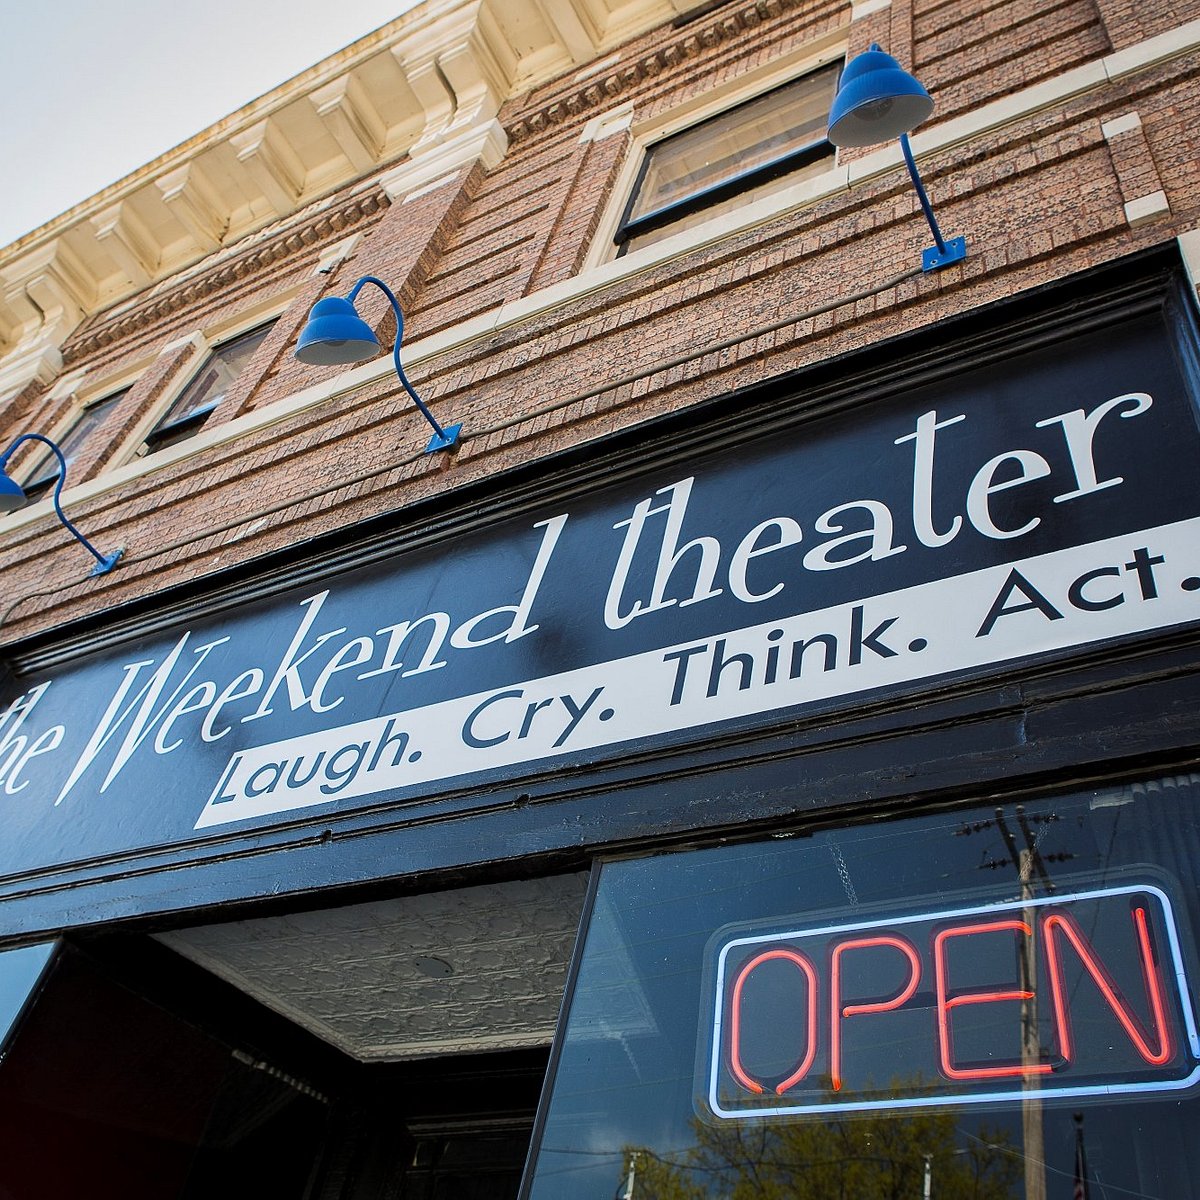 Help The Weekend Theater Get A New A/C Unit!